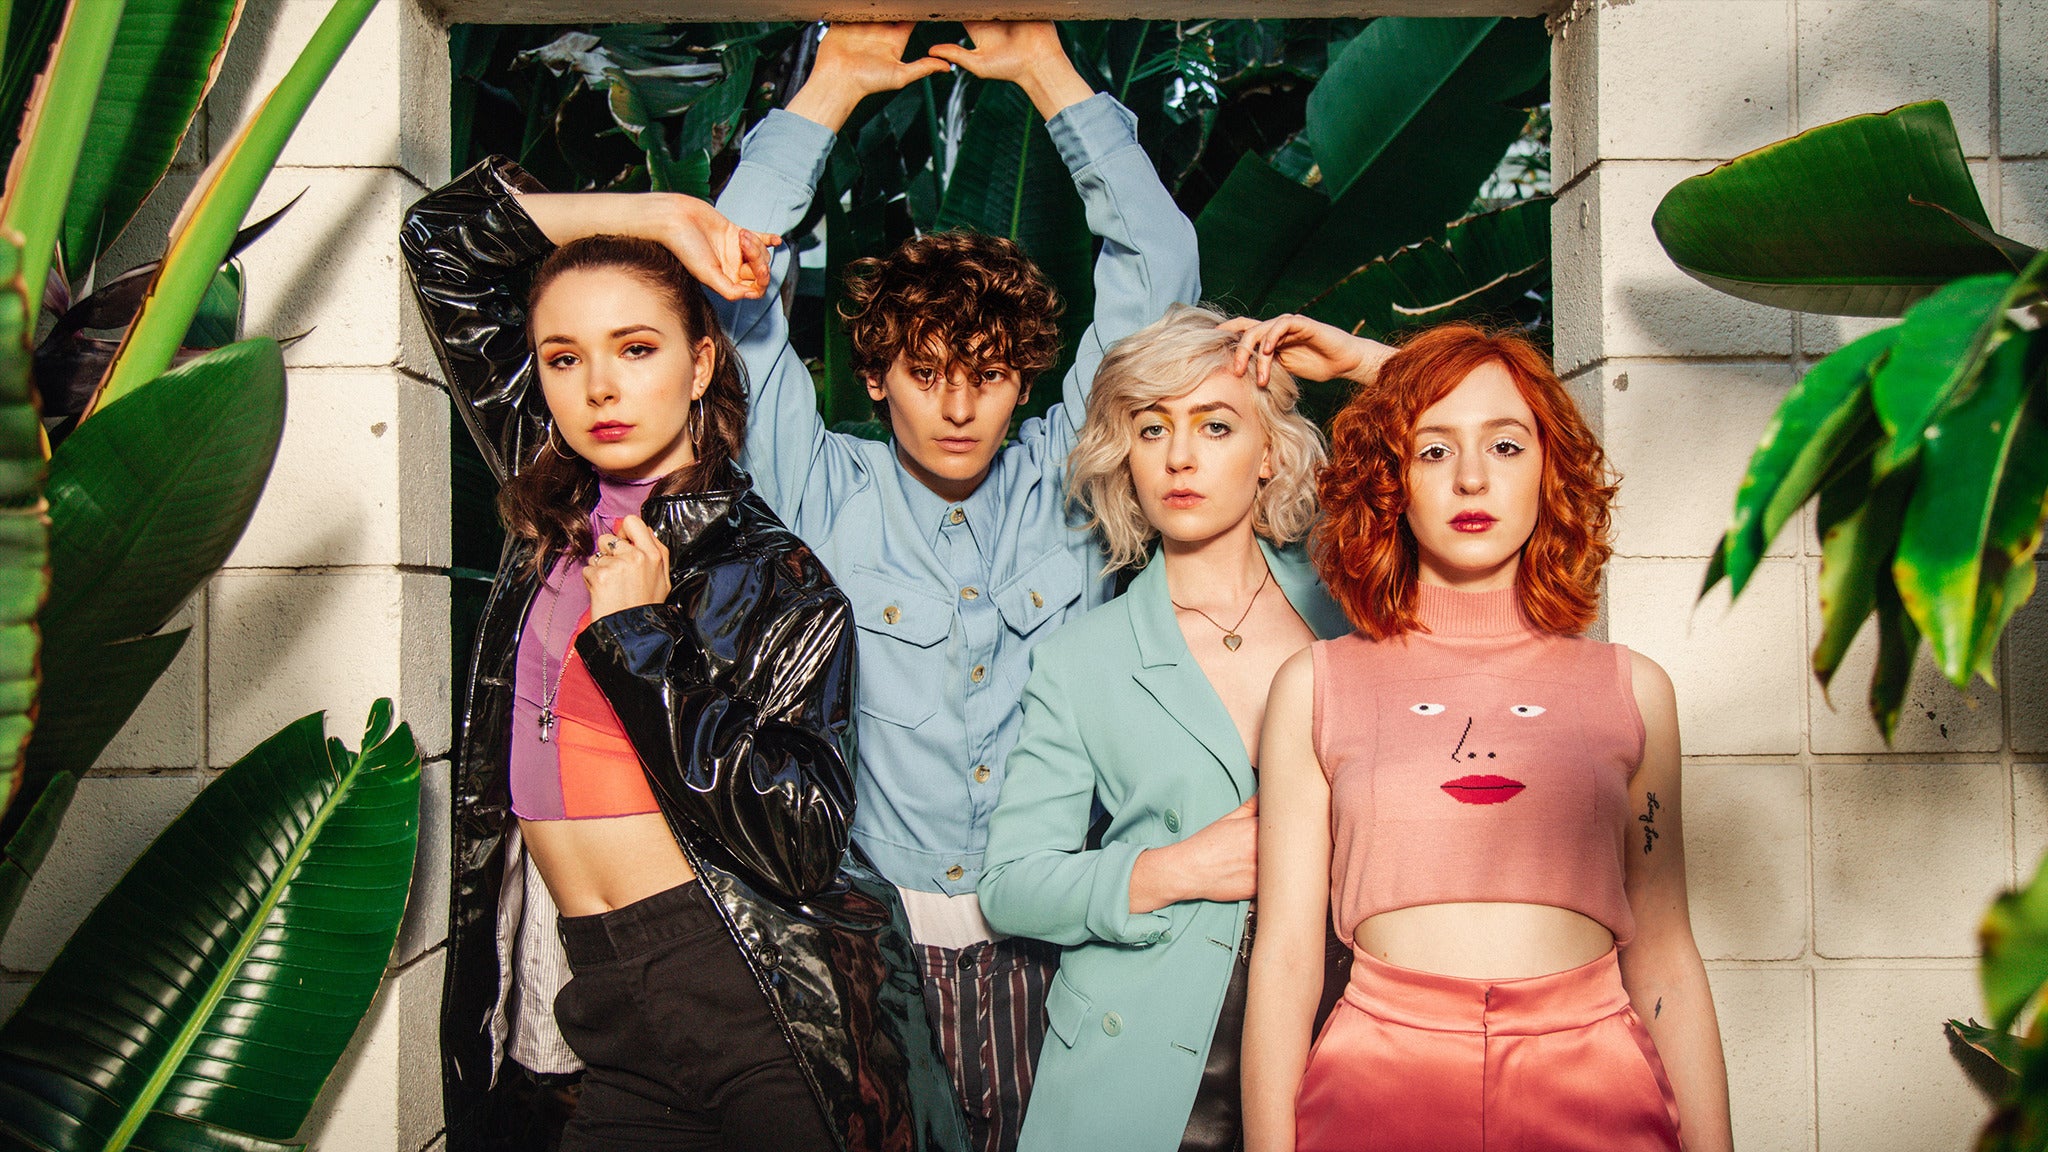 Advanced Placement Tour feat. The Regrettes, Welles, and Micky James in San Diego promo photo for Live Nation presale offer code